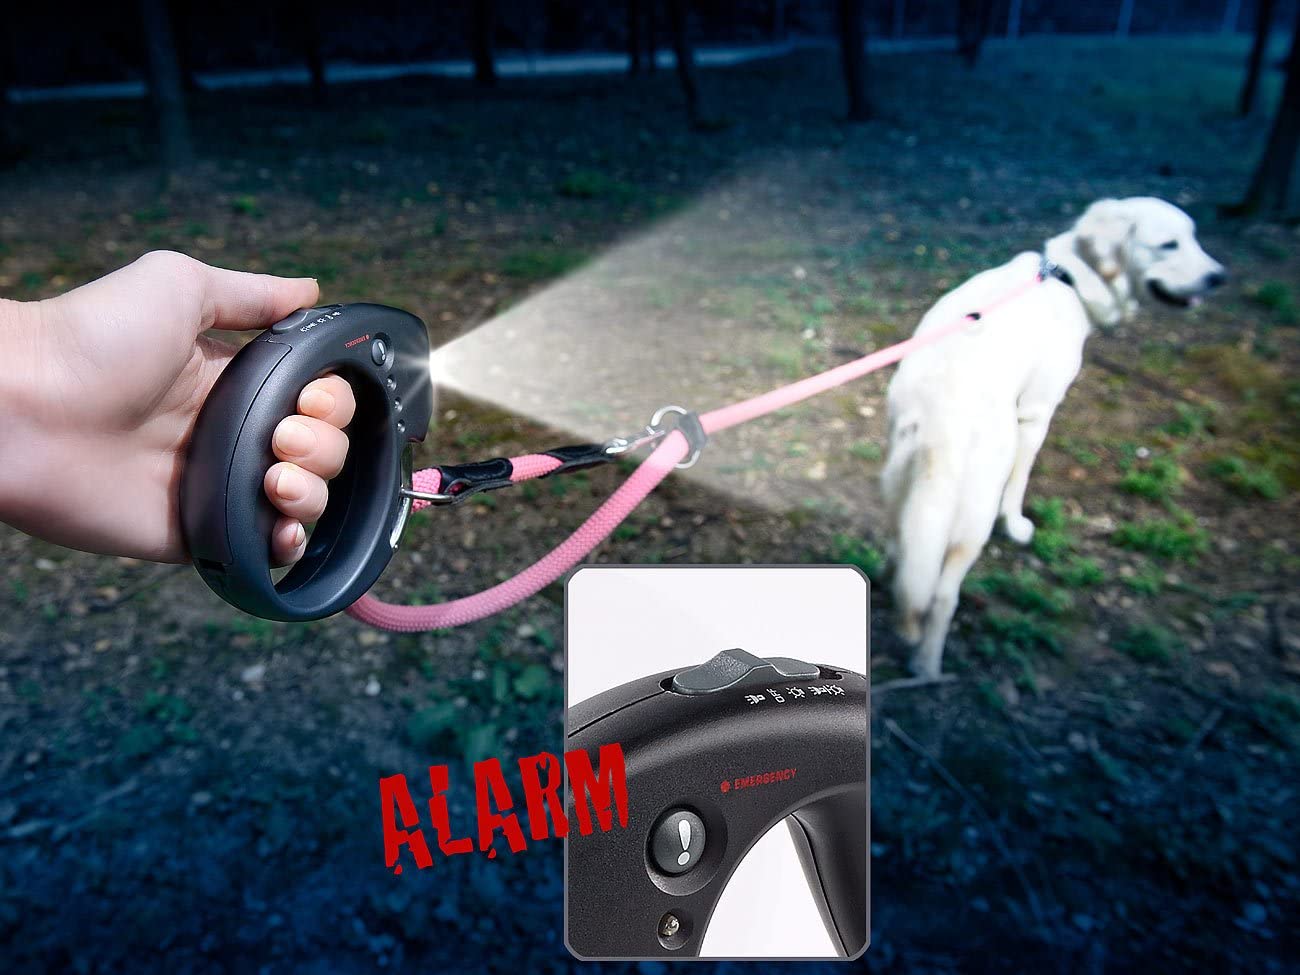 Anti Dog Theft Lead Handle with built-in Alarm, Bright LED Torch & Roadside Lights